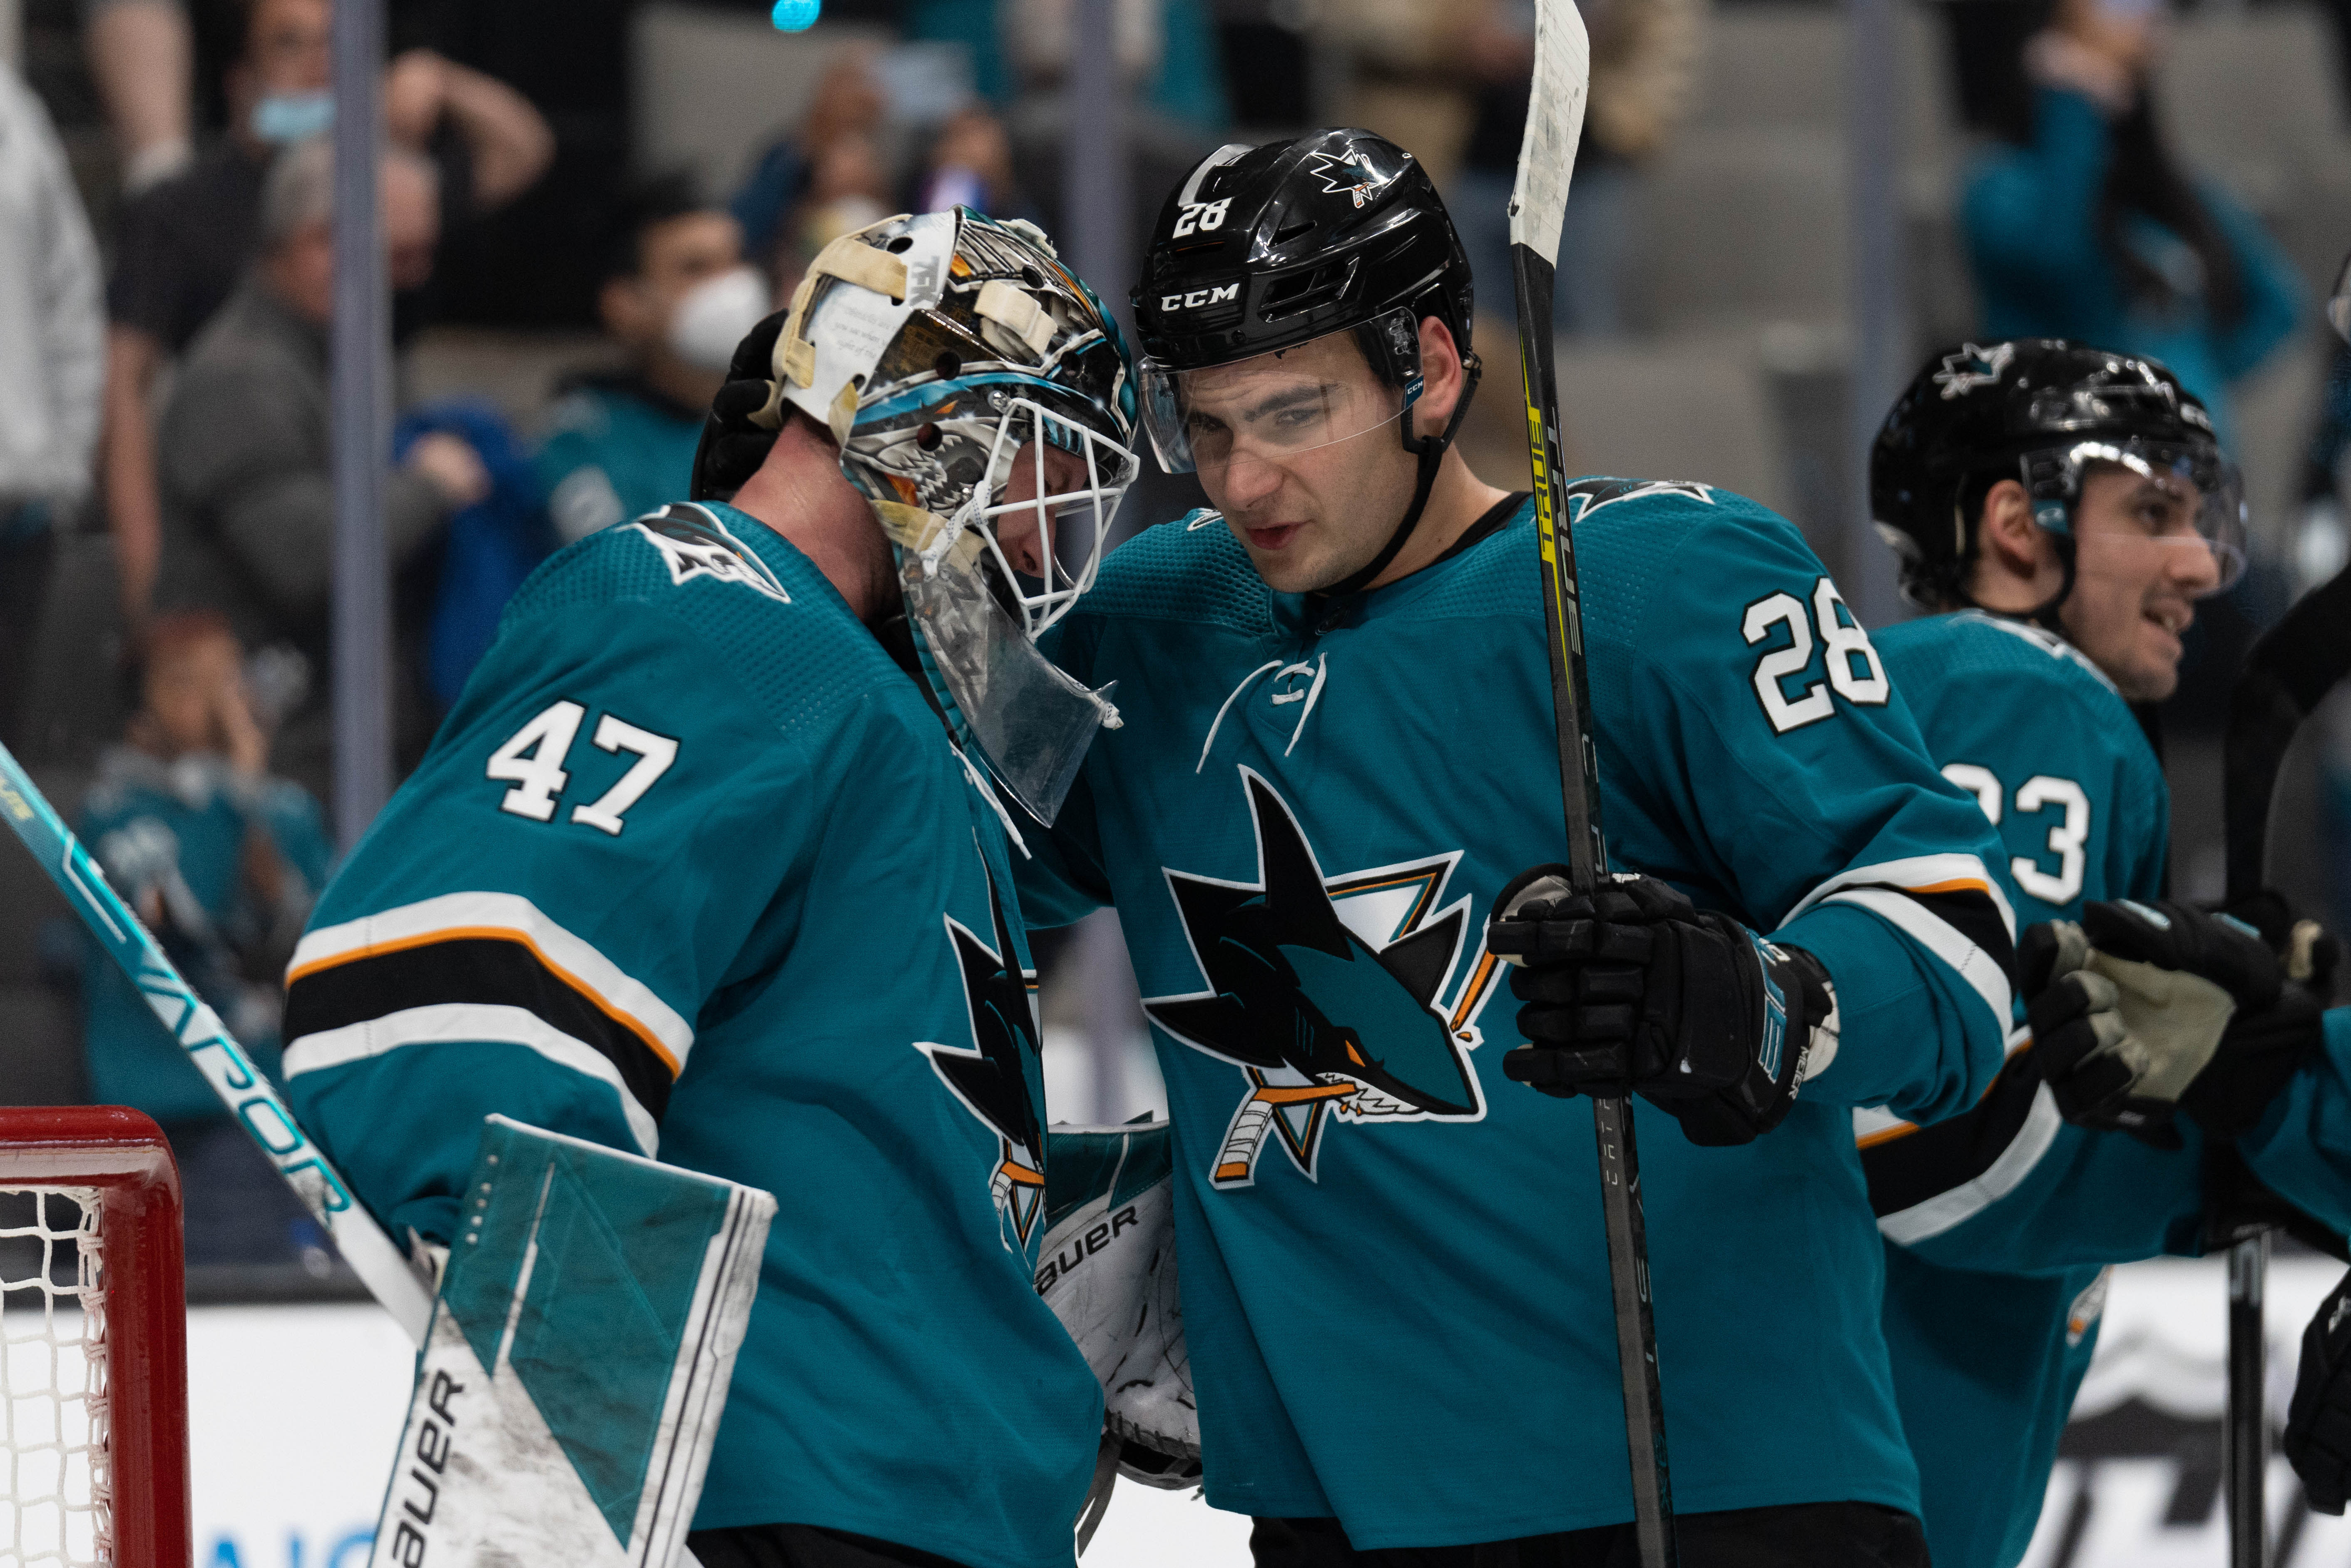 Jan 17, 2022; San Jose, California, USA; San Jose Sharks goaltender James Reimer (47) and right wing Timo Meier (28) celebrate after defeating the Los Angeles Kings at SAP Center at San Jose.